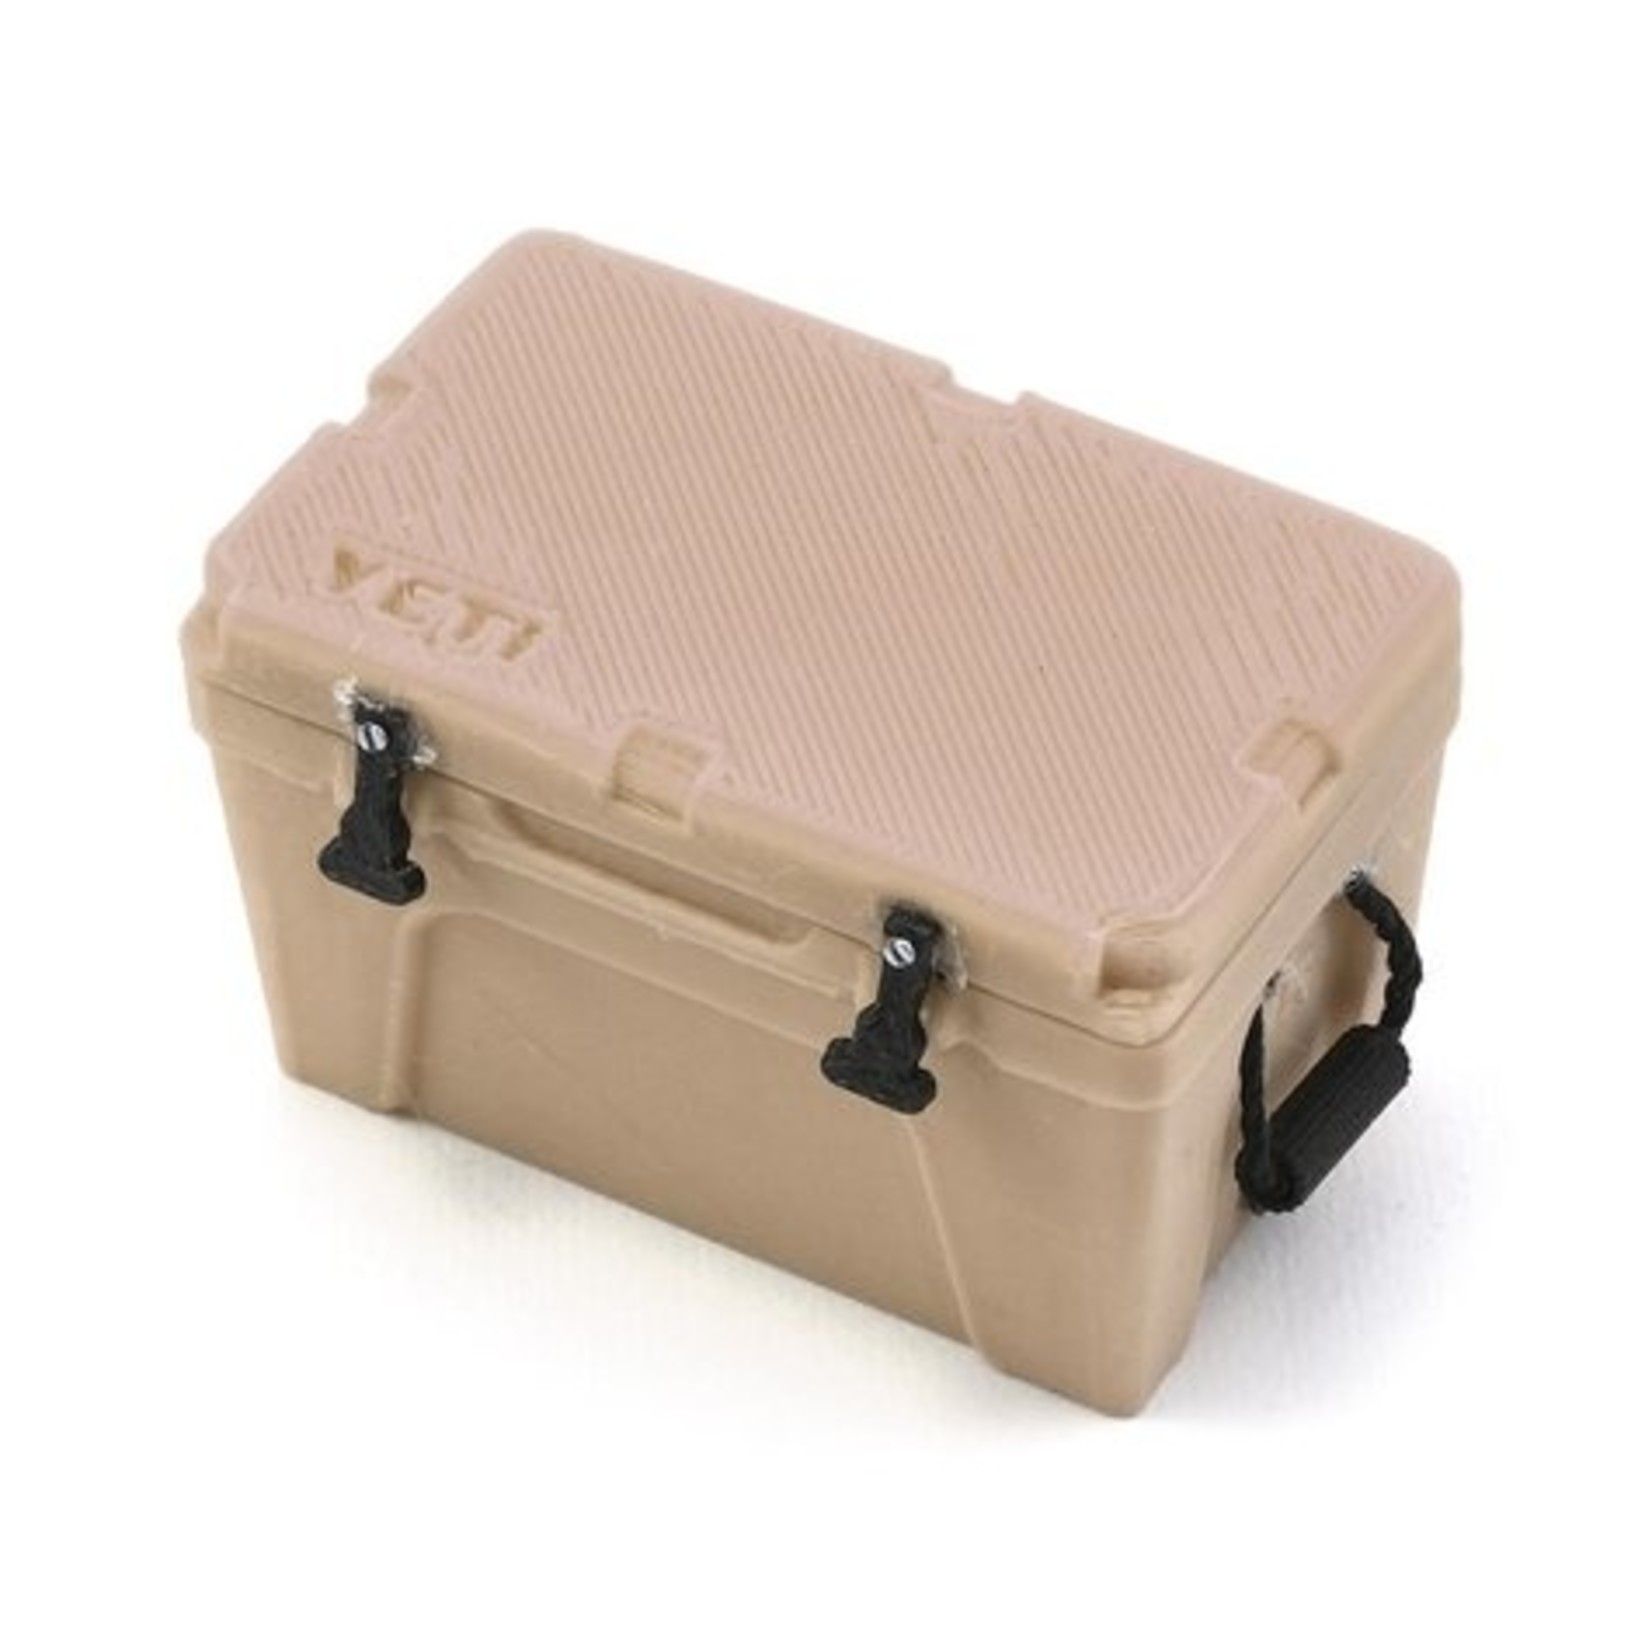 EXC-ERC-10-9023-T Exclusive RC Scale Yeti Cooler (Tan) (Miniature Scale  Accessory) - Extreme R/C Hobbies